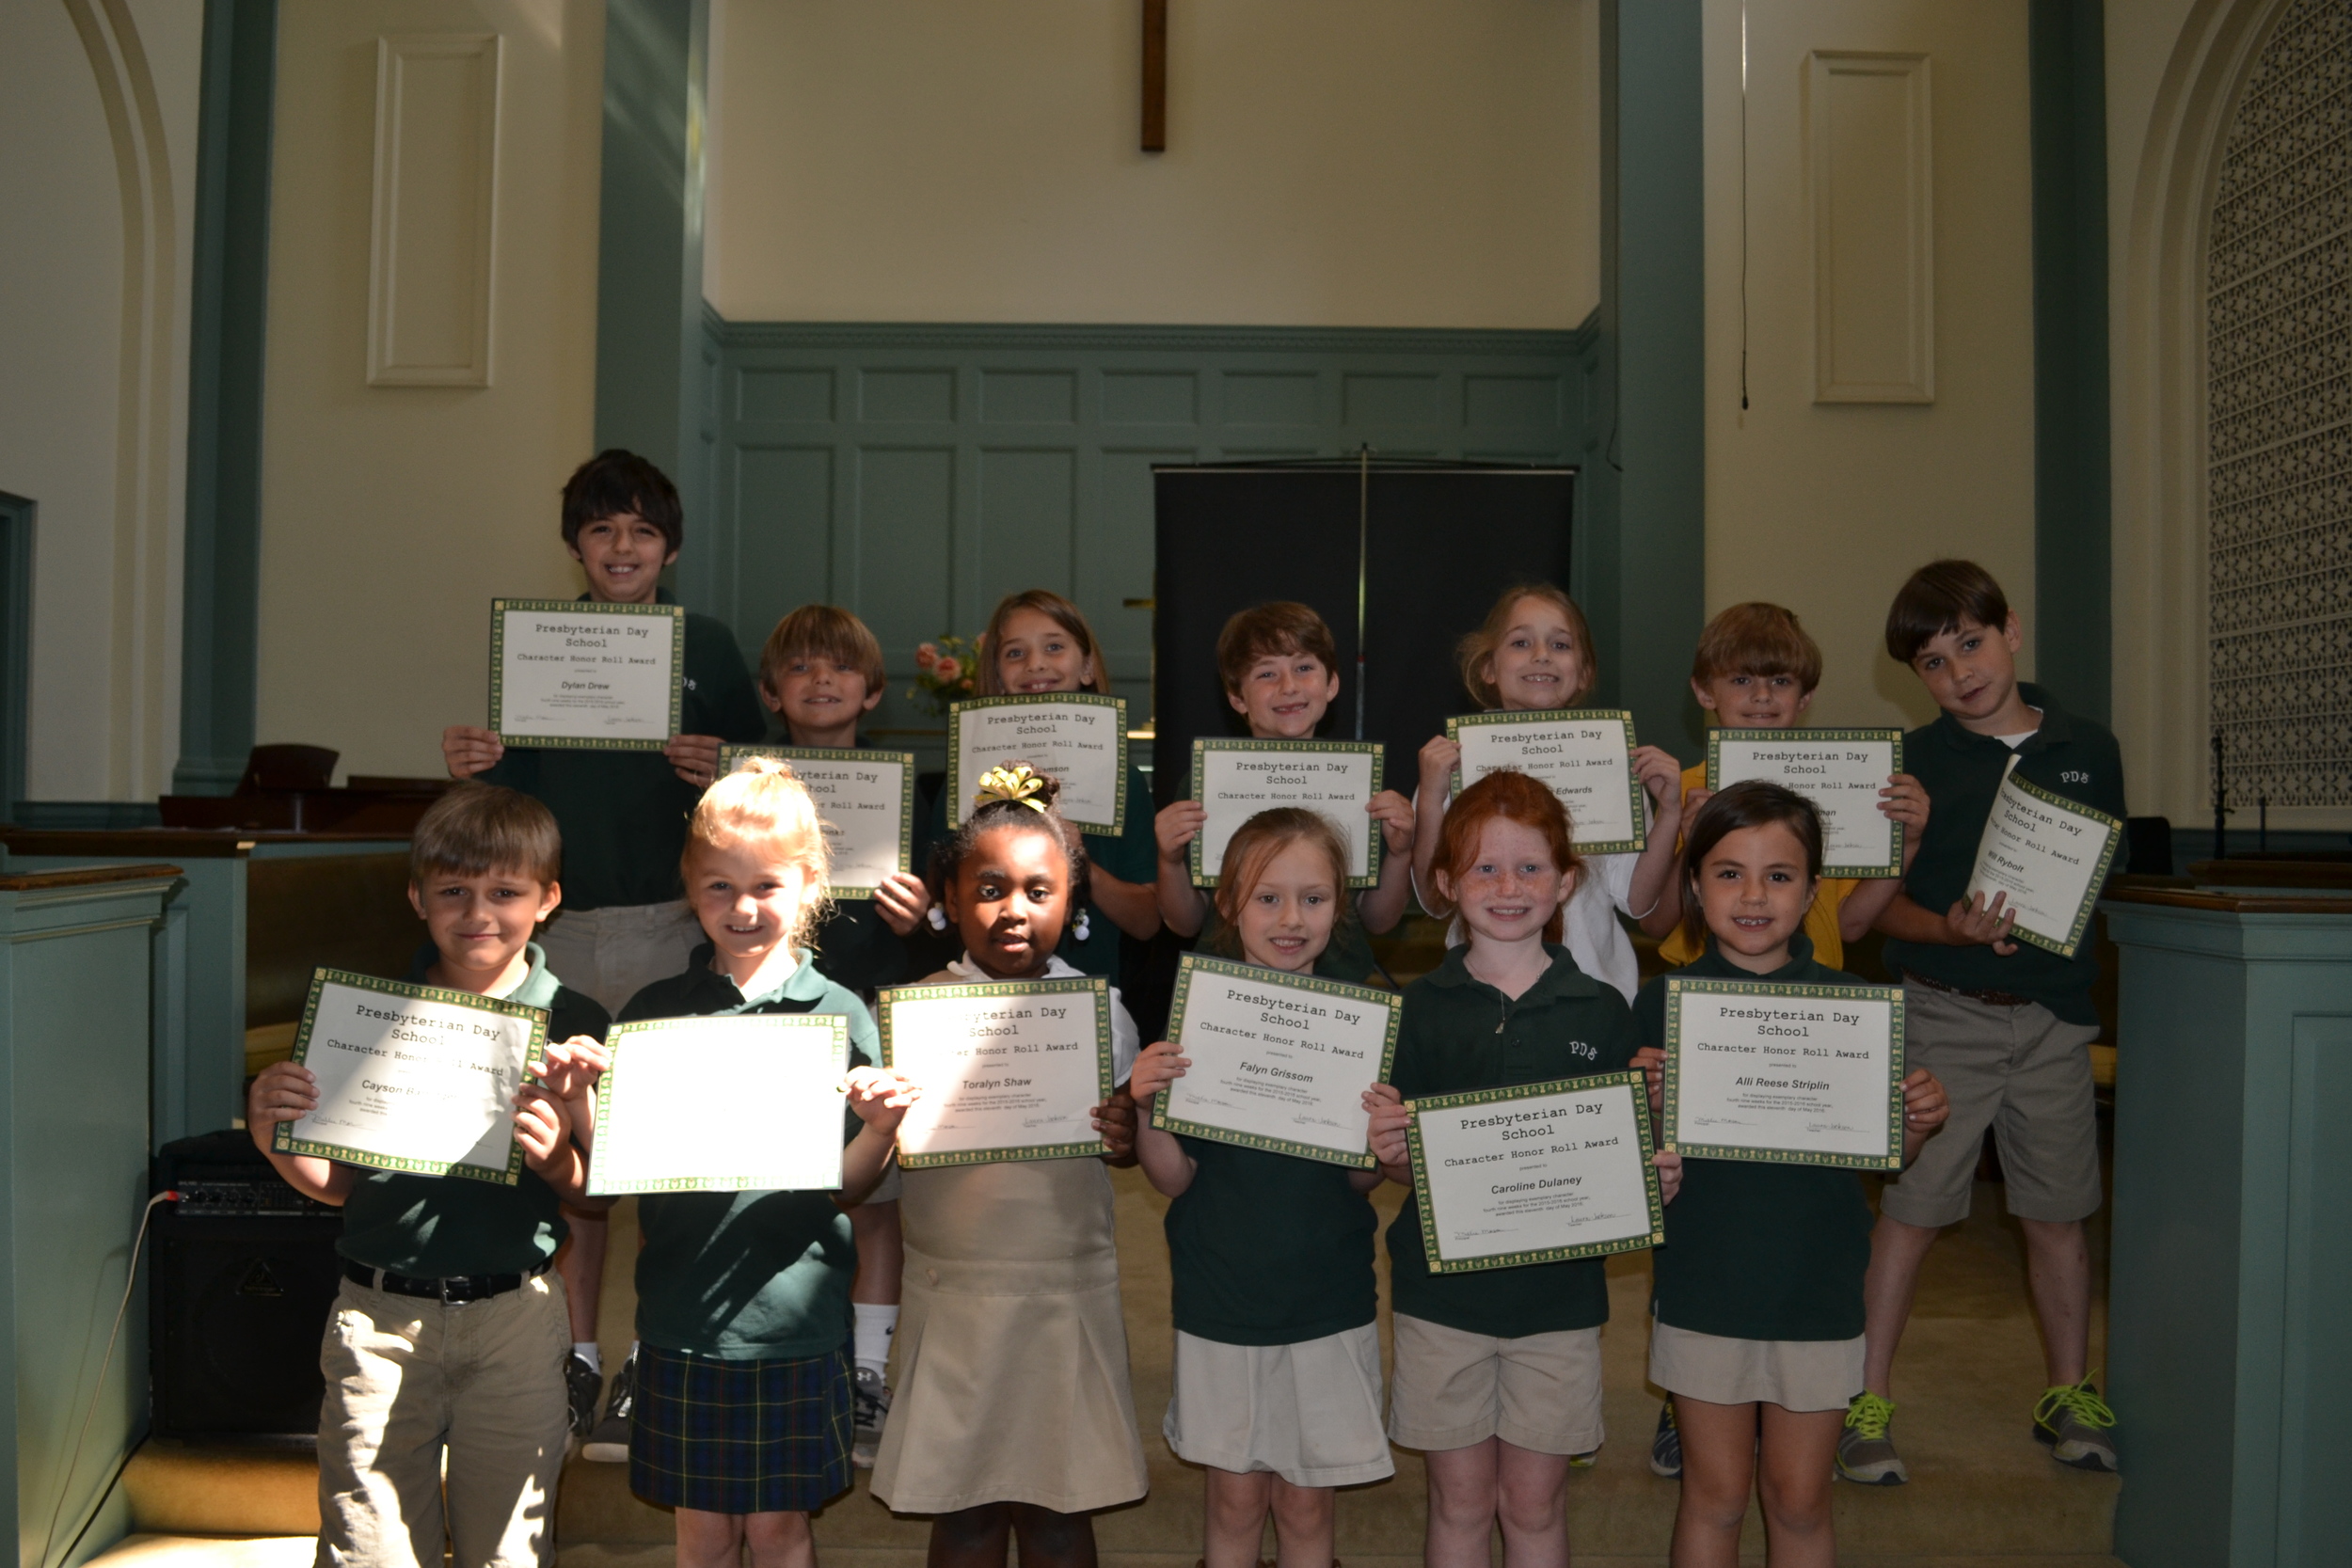 1st grade character honor roll